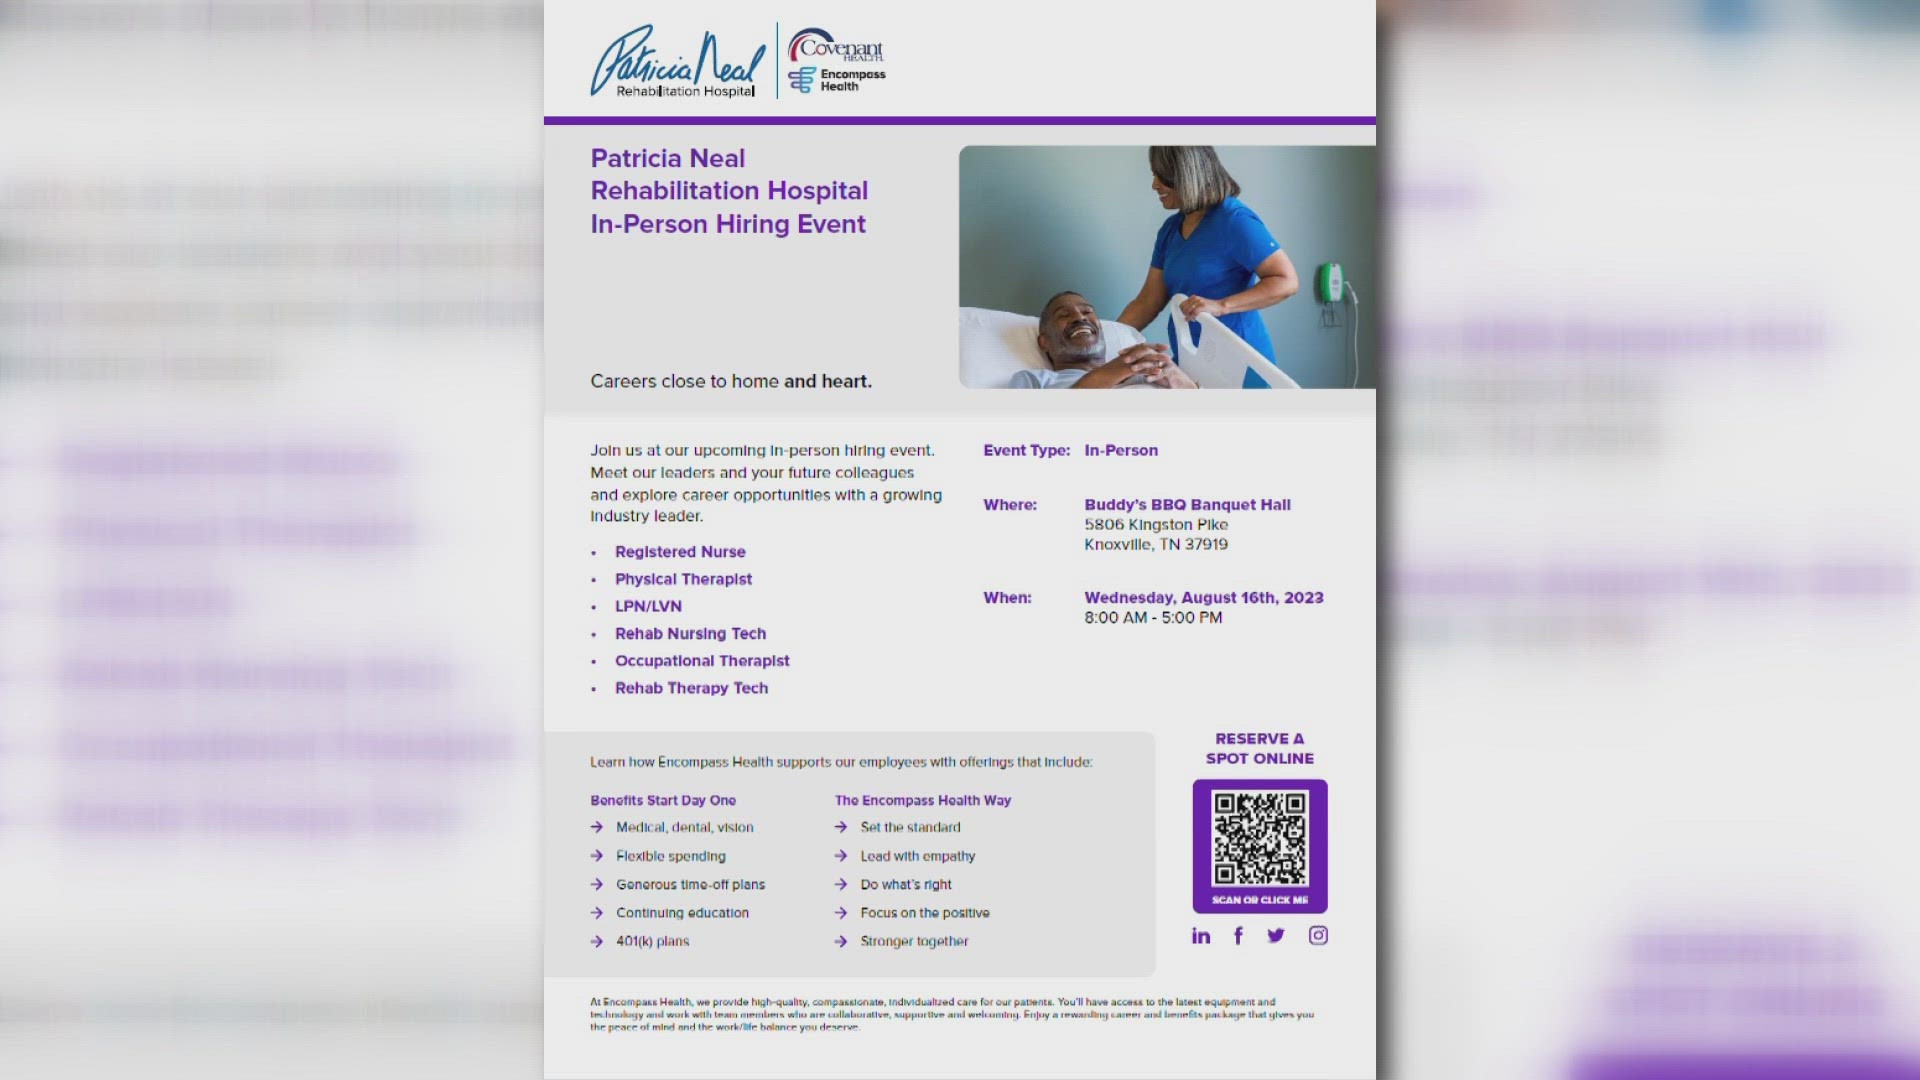 The Patricia Neal Rehabilitation Hospital is looking for registered nurses, physical therapists and more.